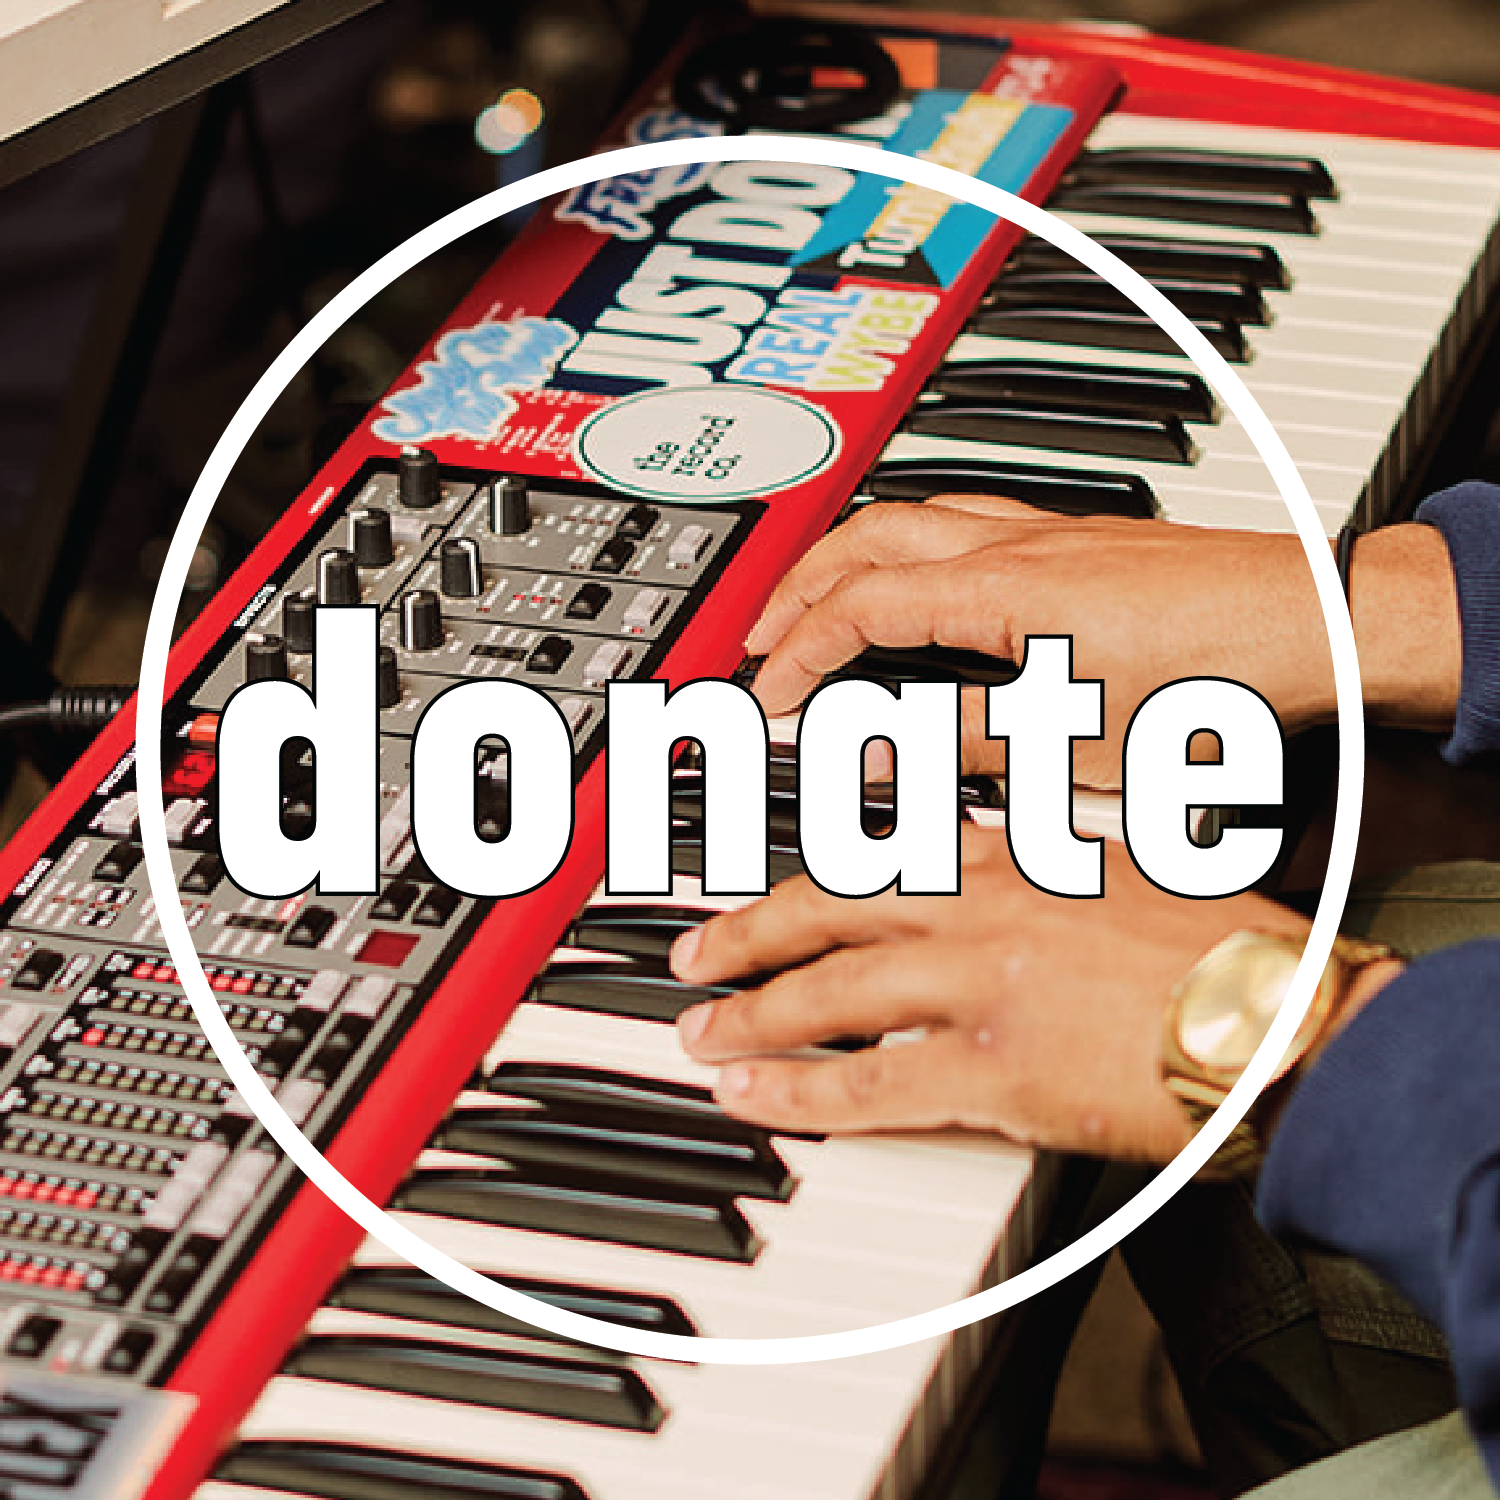 Image of hands on keyboard with circle that reads "donate"